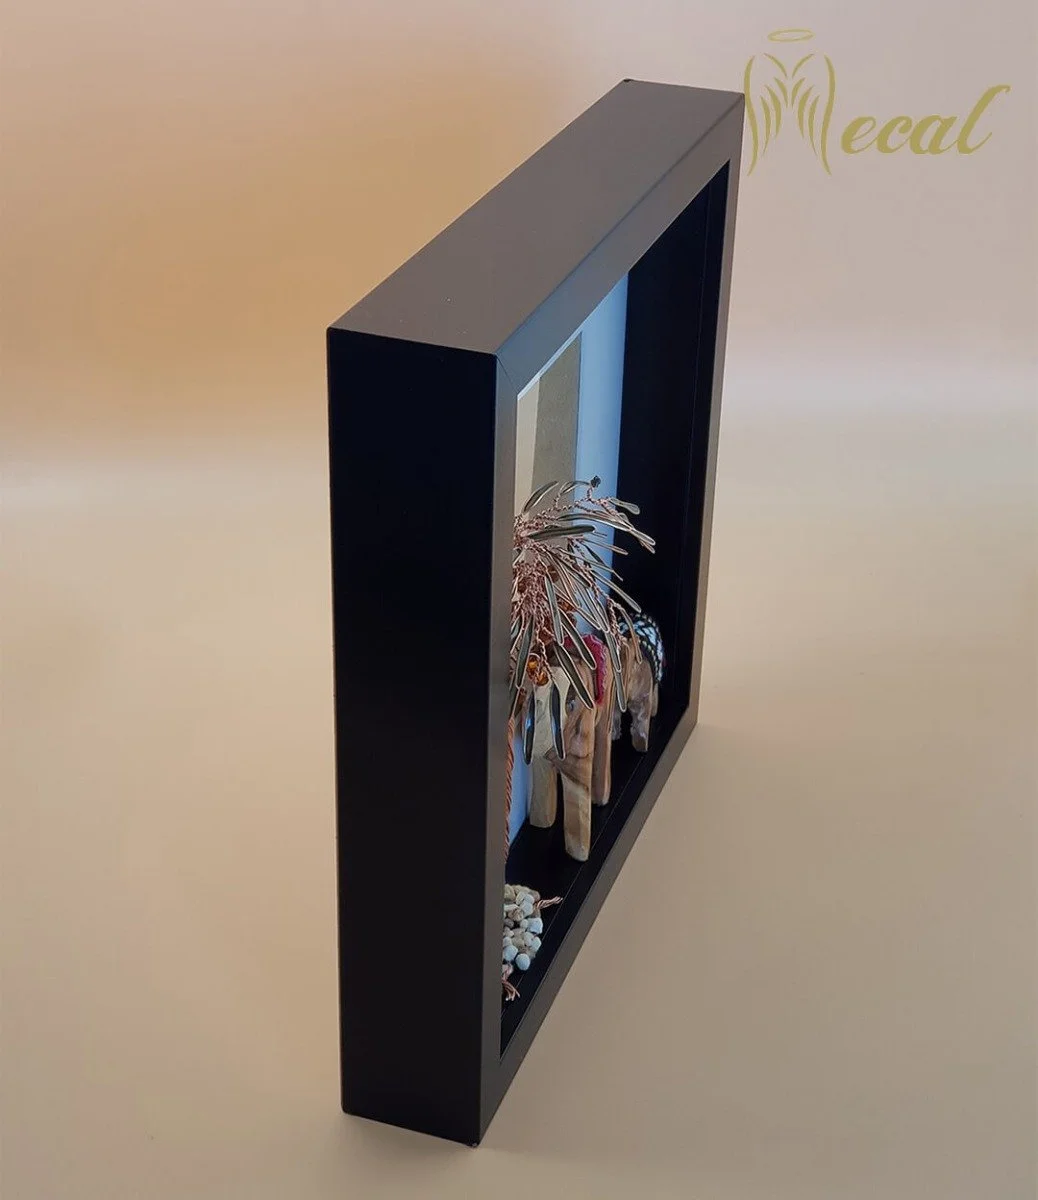 Camels & Palm Tree Frame by Mecal